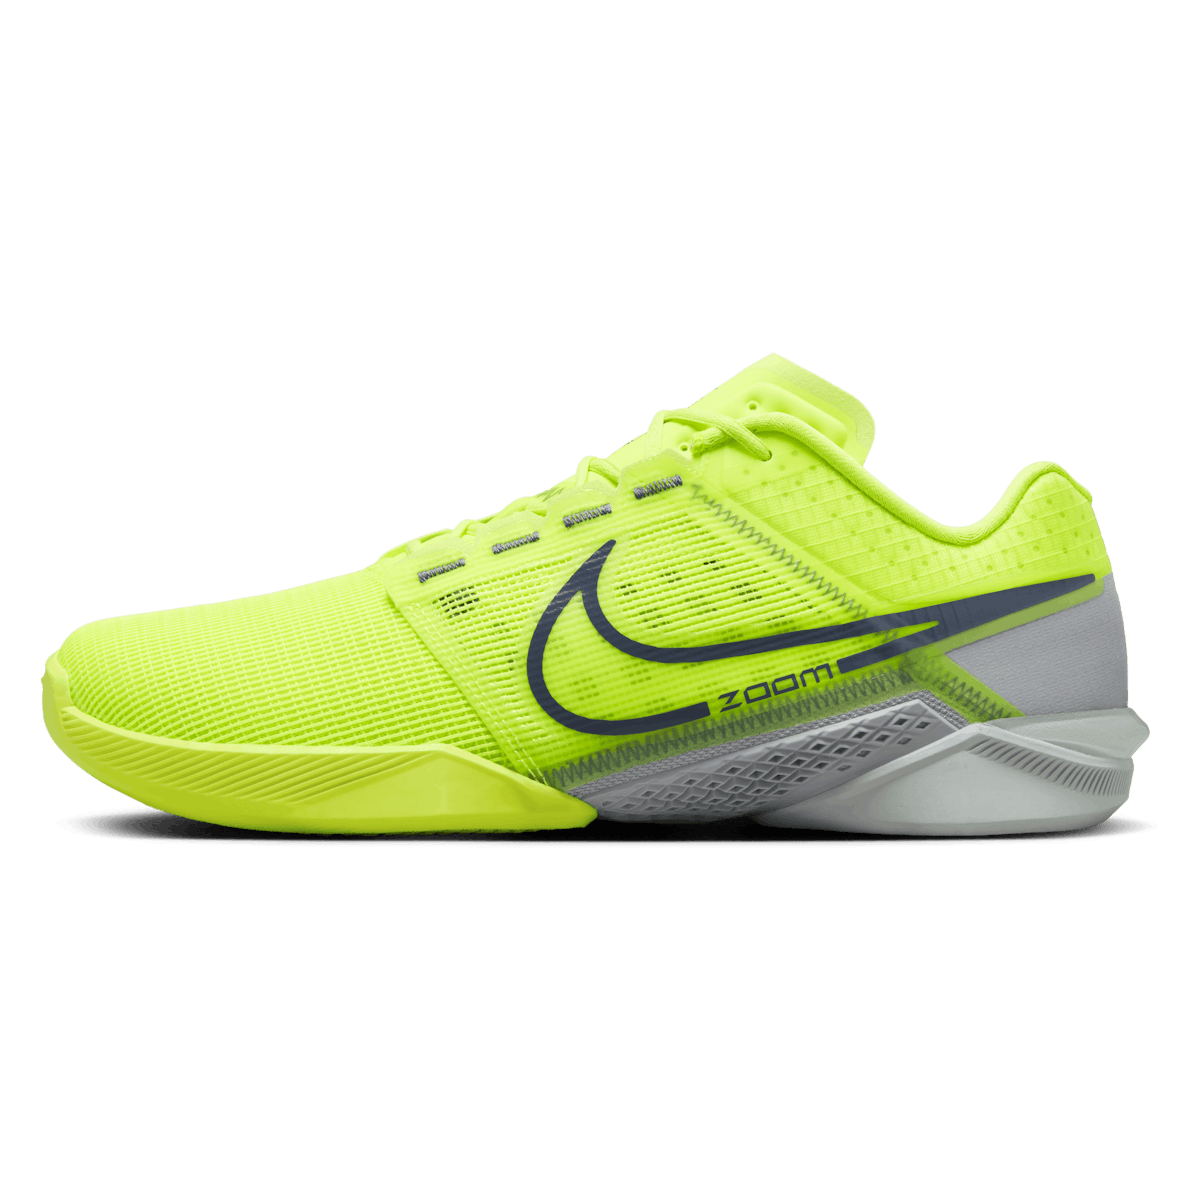 Nike Zoom Metcon Turbo 2 "Volt Diffused Blue"